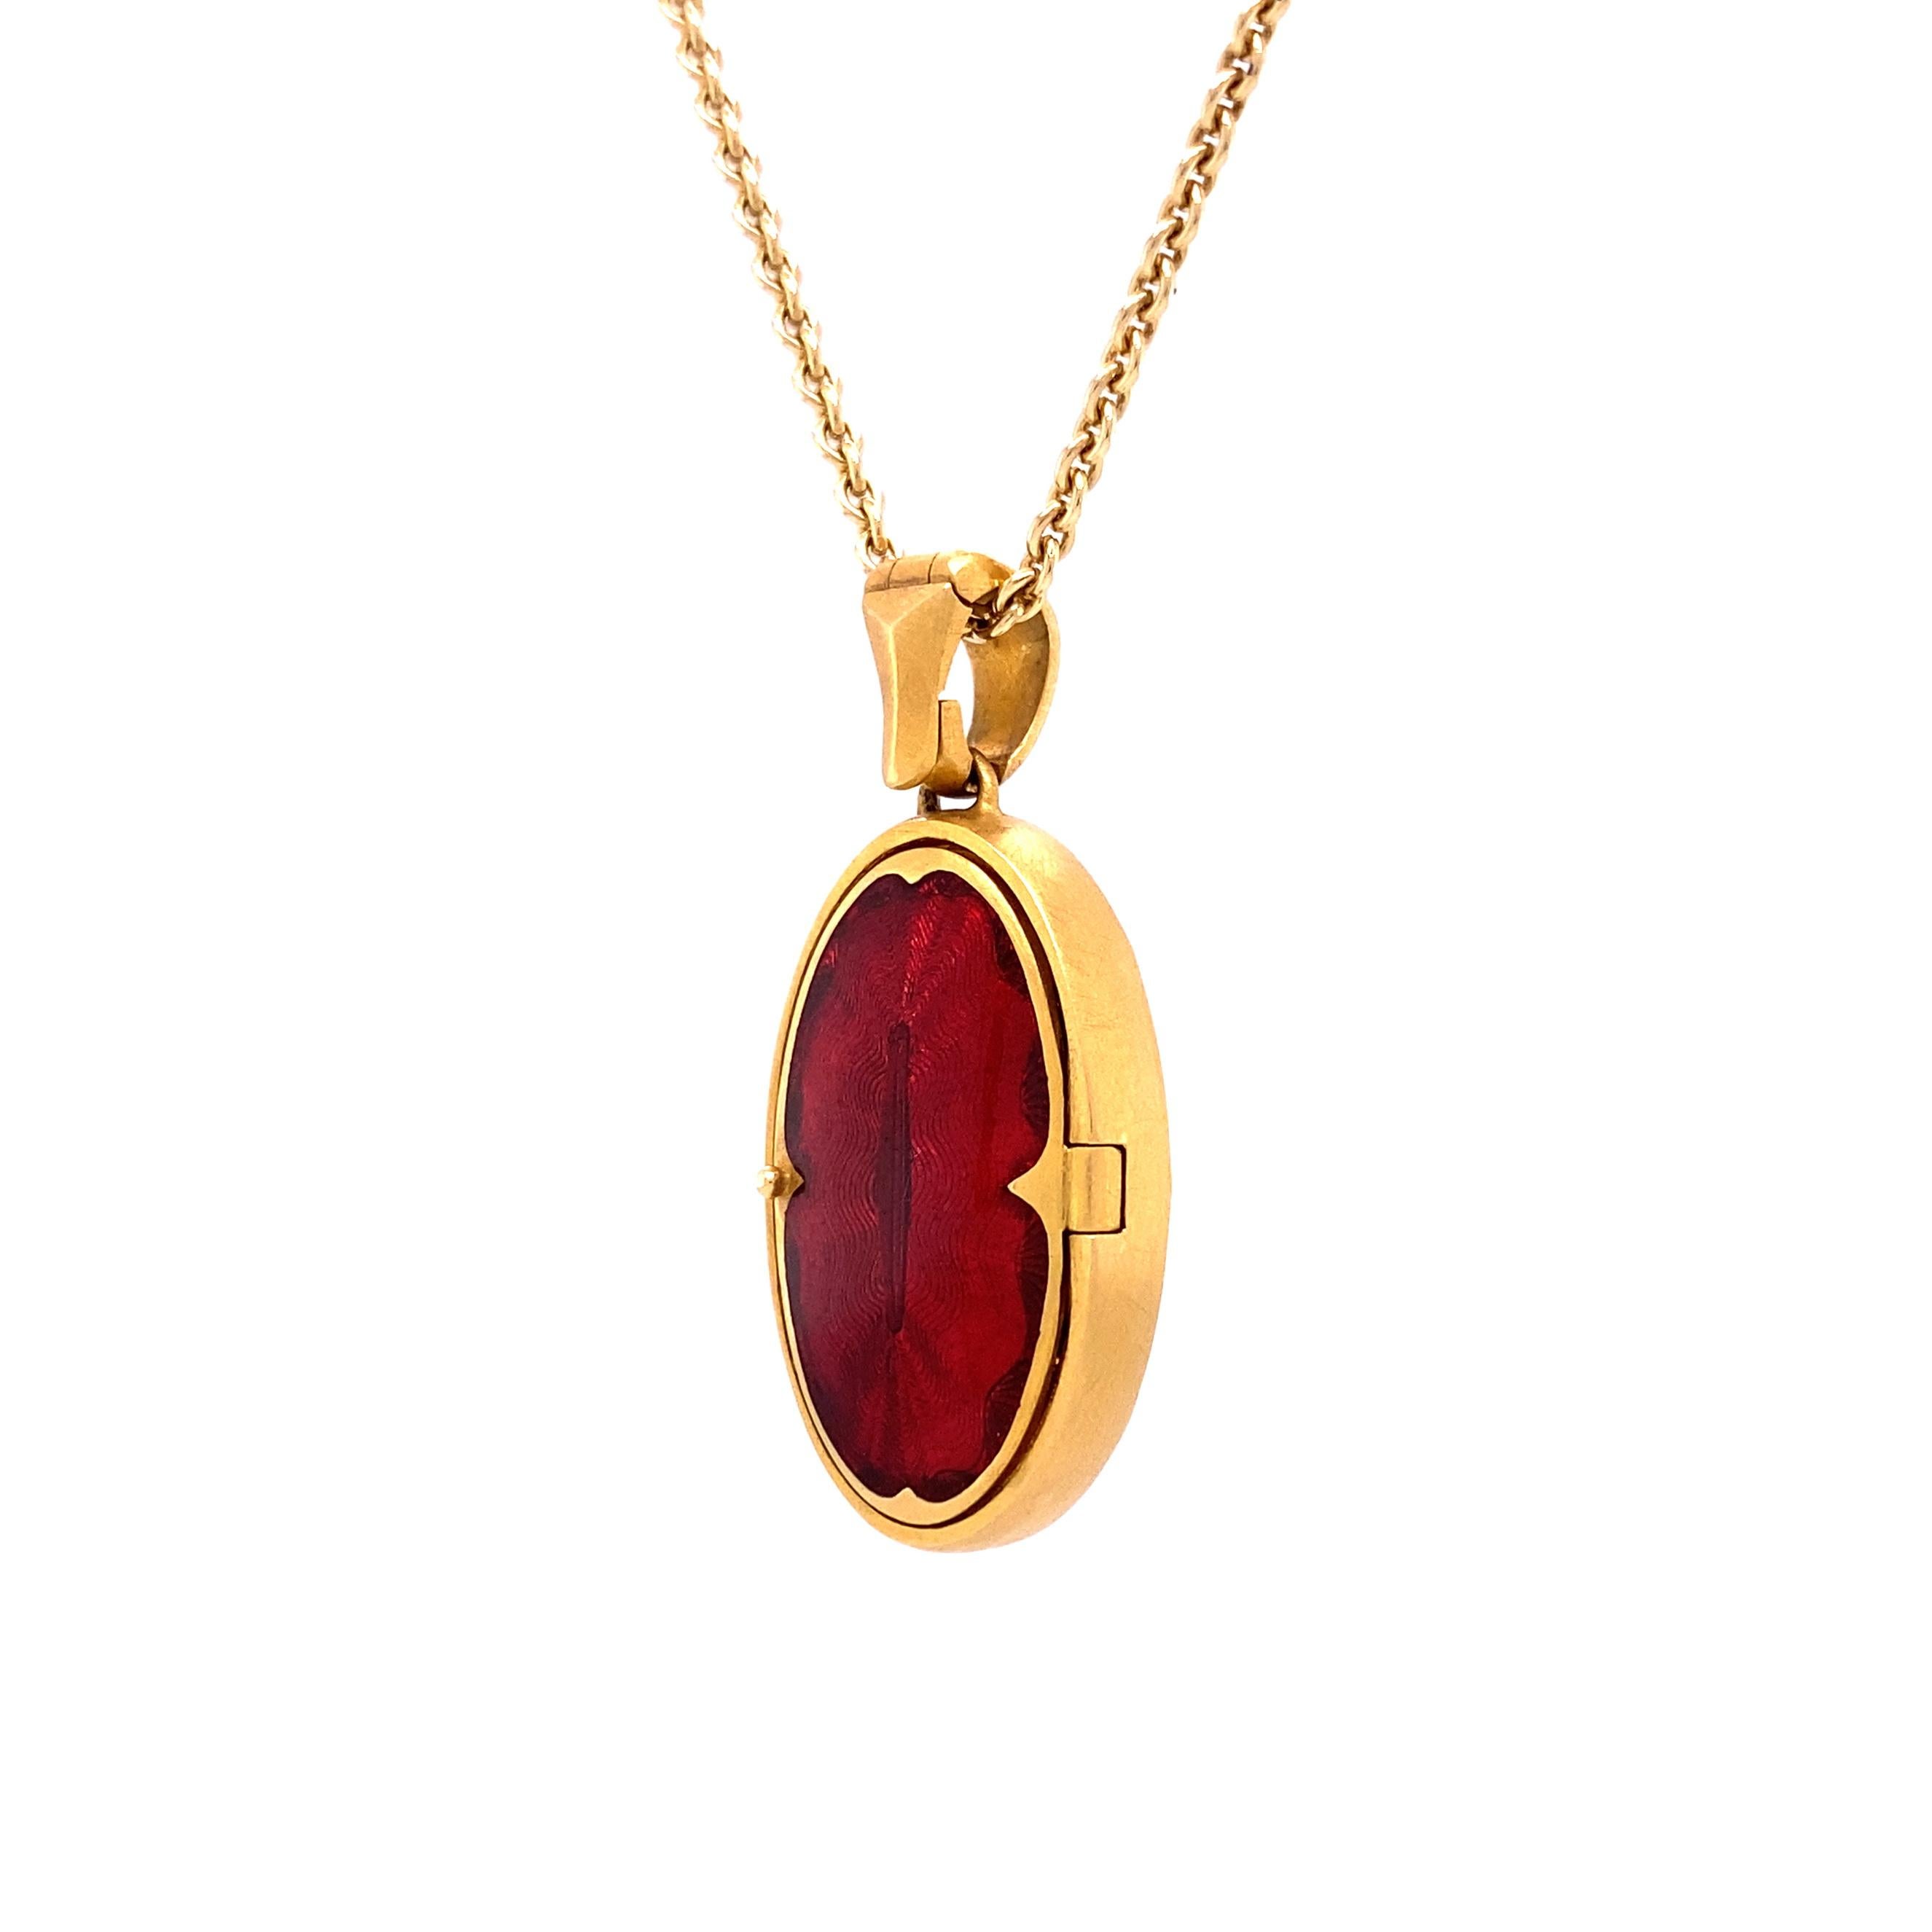 Contemporary Oval Pendant Locket Necklace - 18k Yellow Gold - Red Guilloche Enamel Paillons For Sale